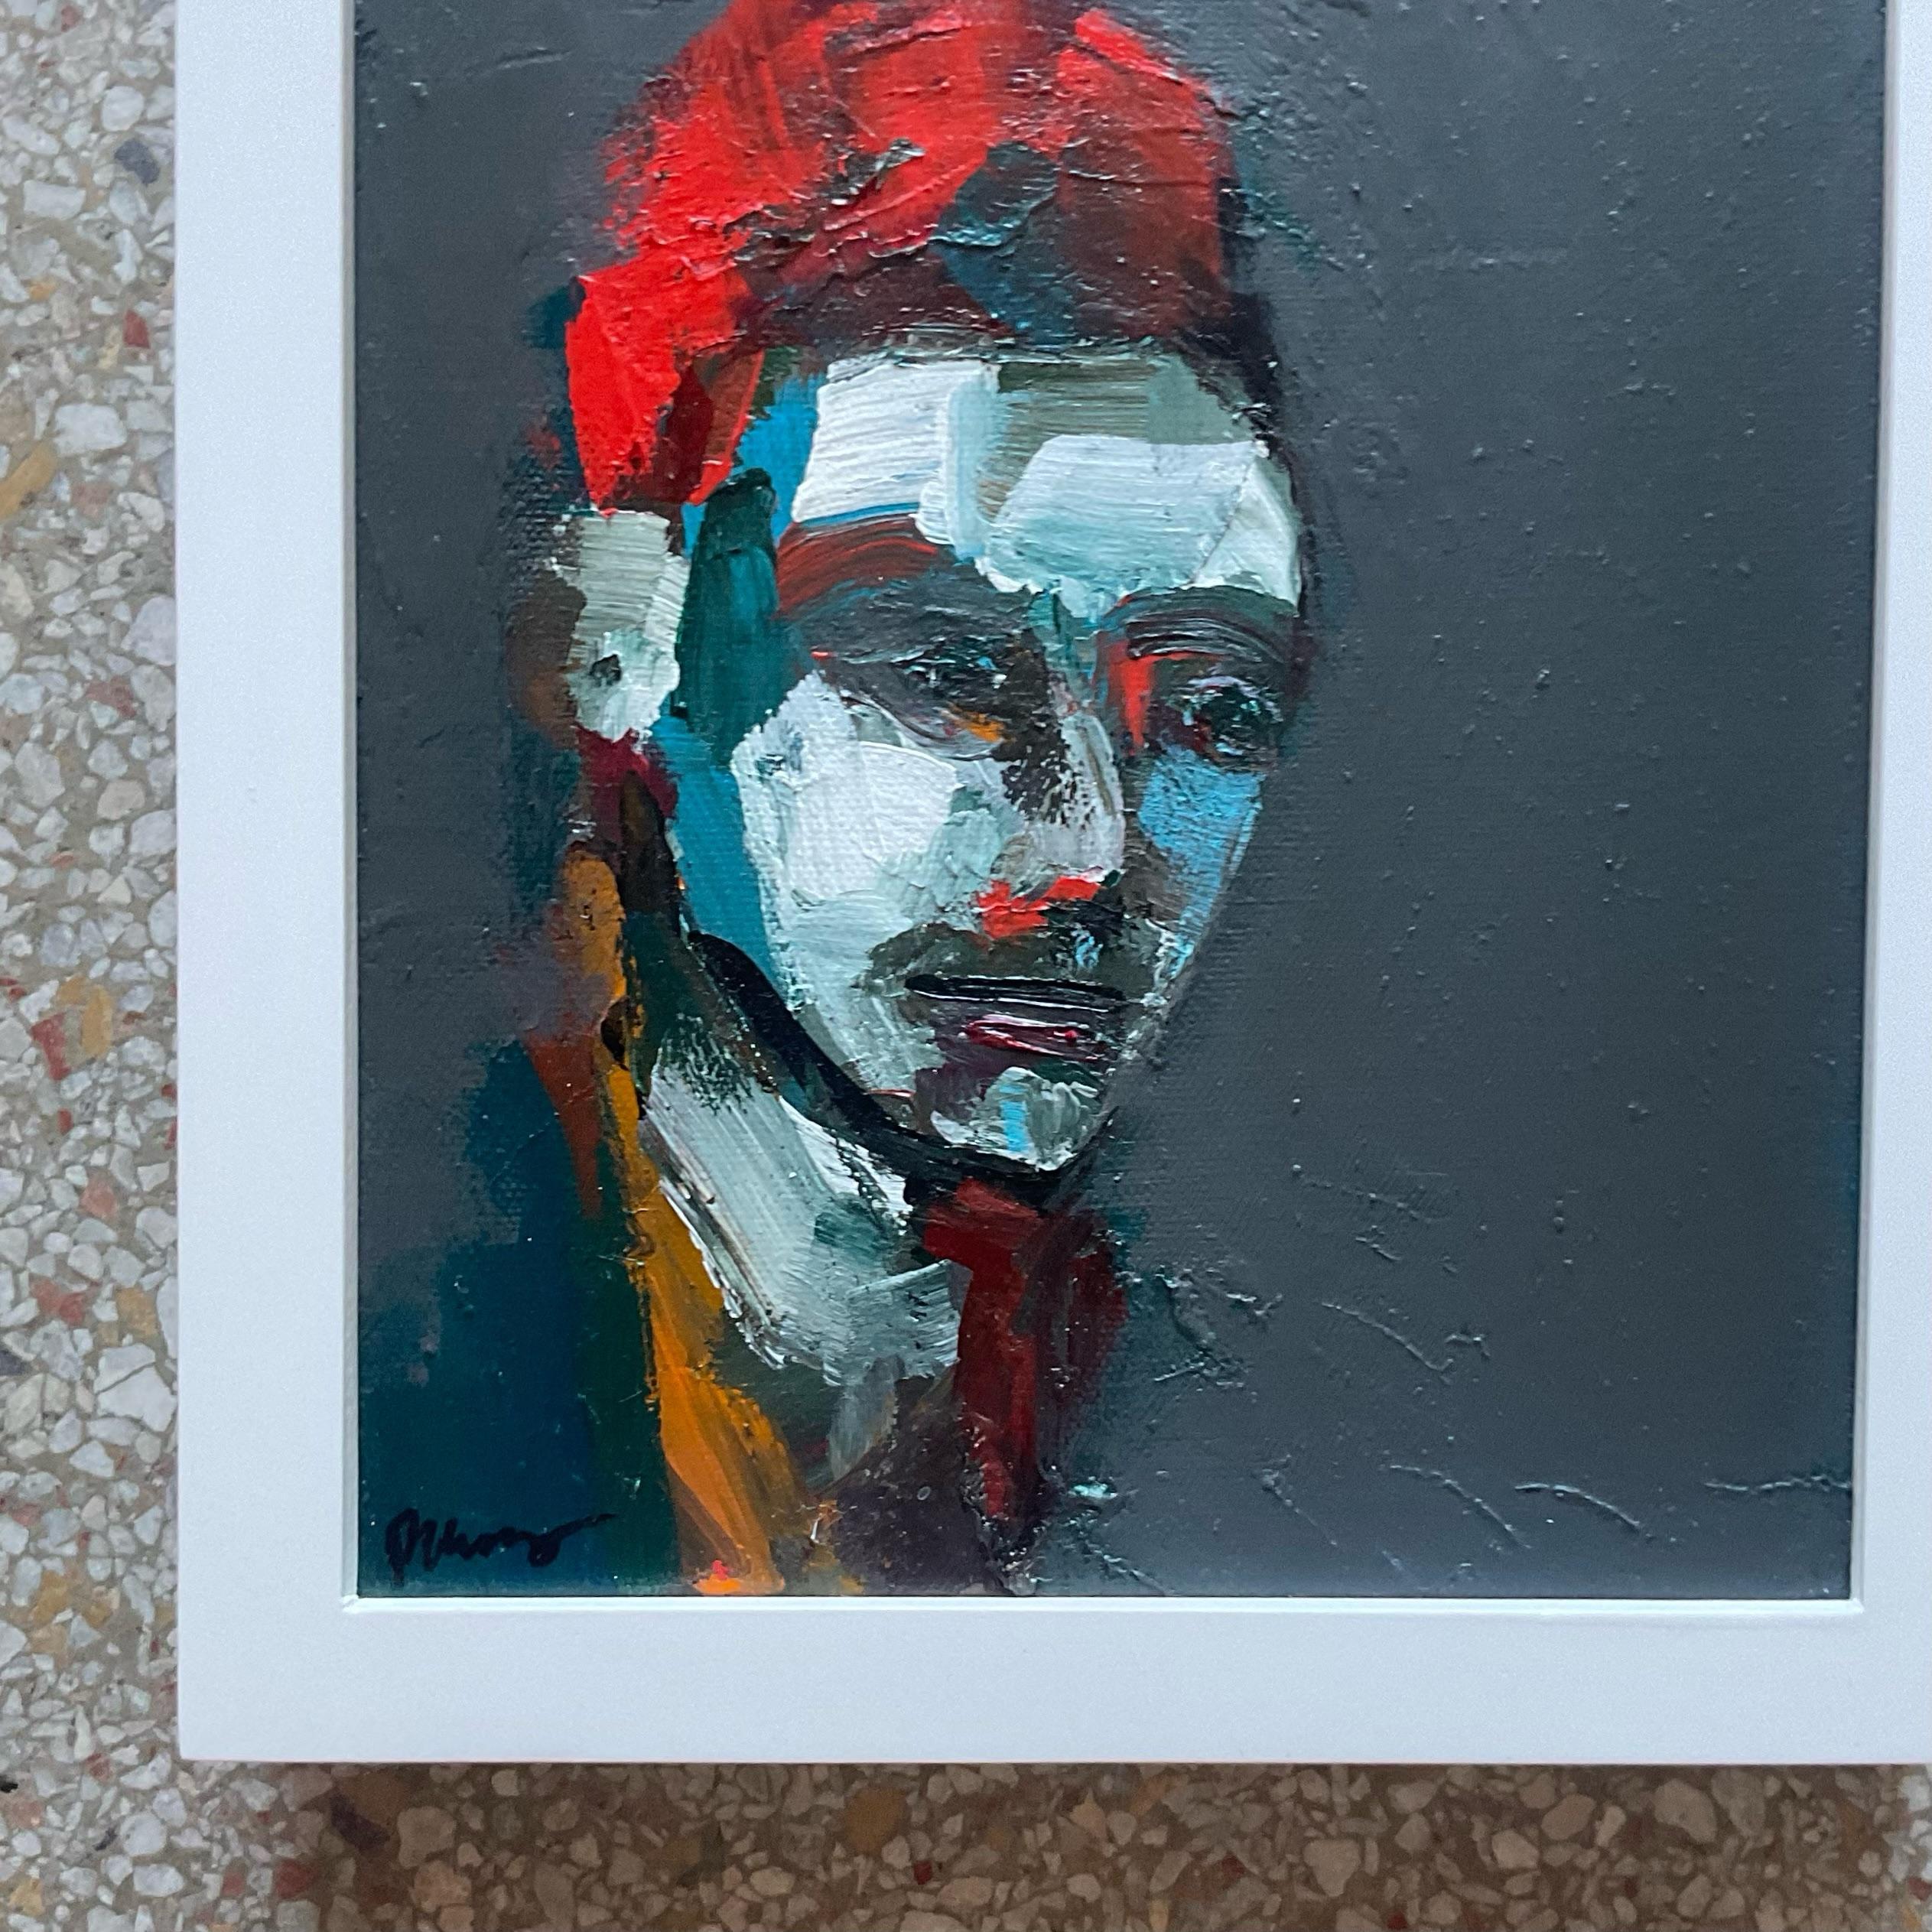 Vibrant Fauvist abstract oil painting with a deep rich background color of teal gray that allows the vibrancy of the abstract portrait to pop from the canvas. This work has immaculate brushstrokes and an incredible level of detail. Signed by the